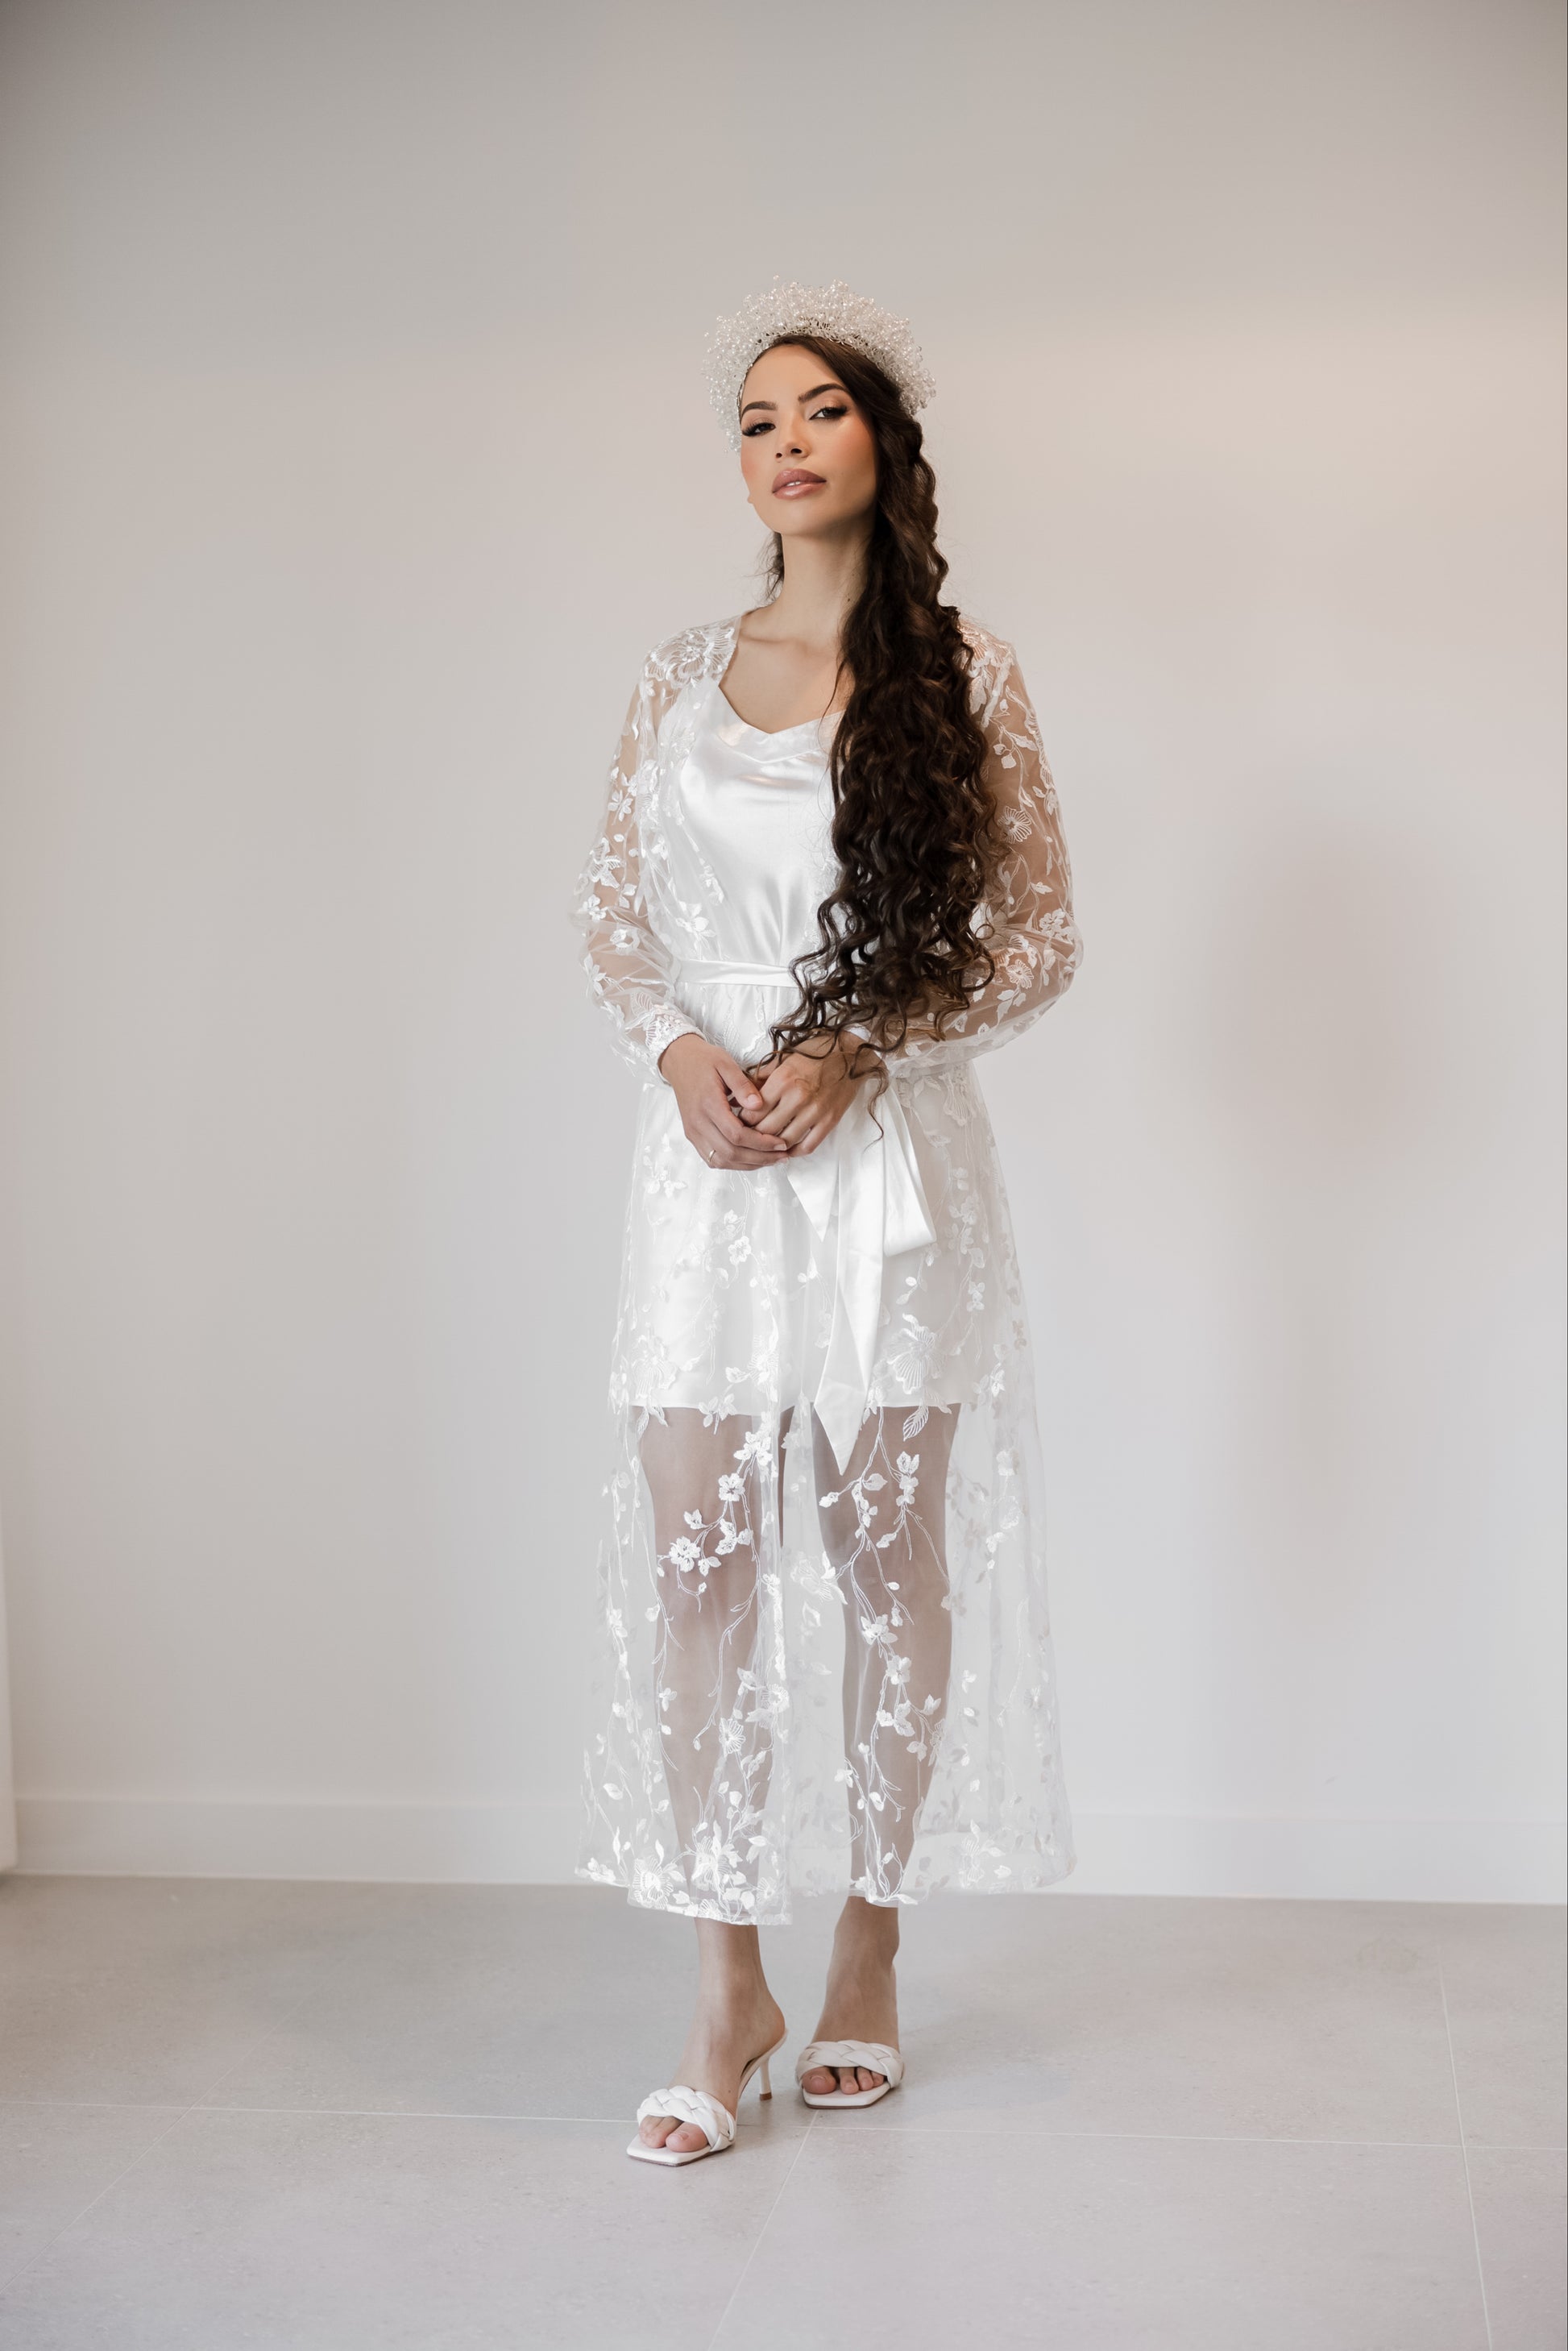 Image of a woman in white lace, bridal short slip